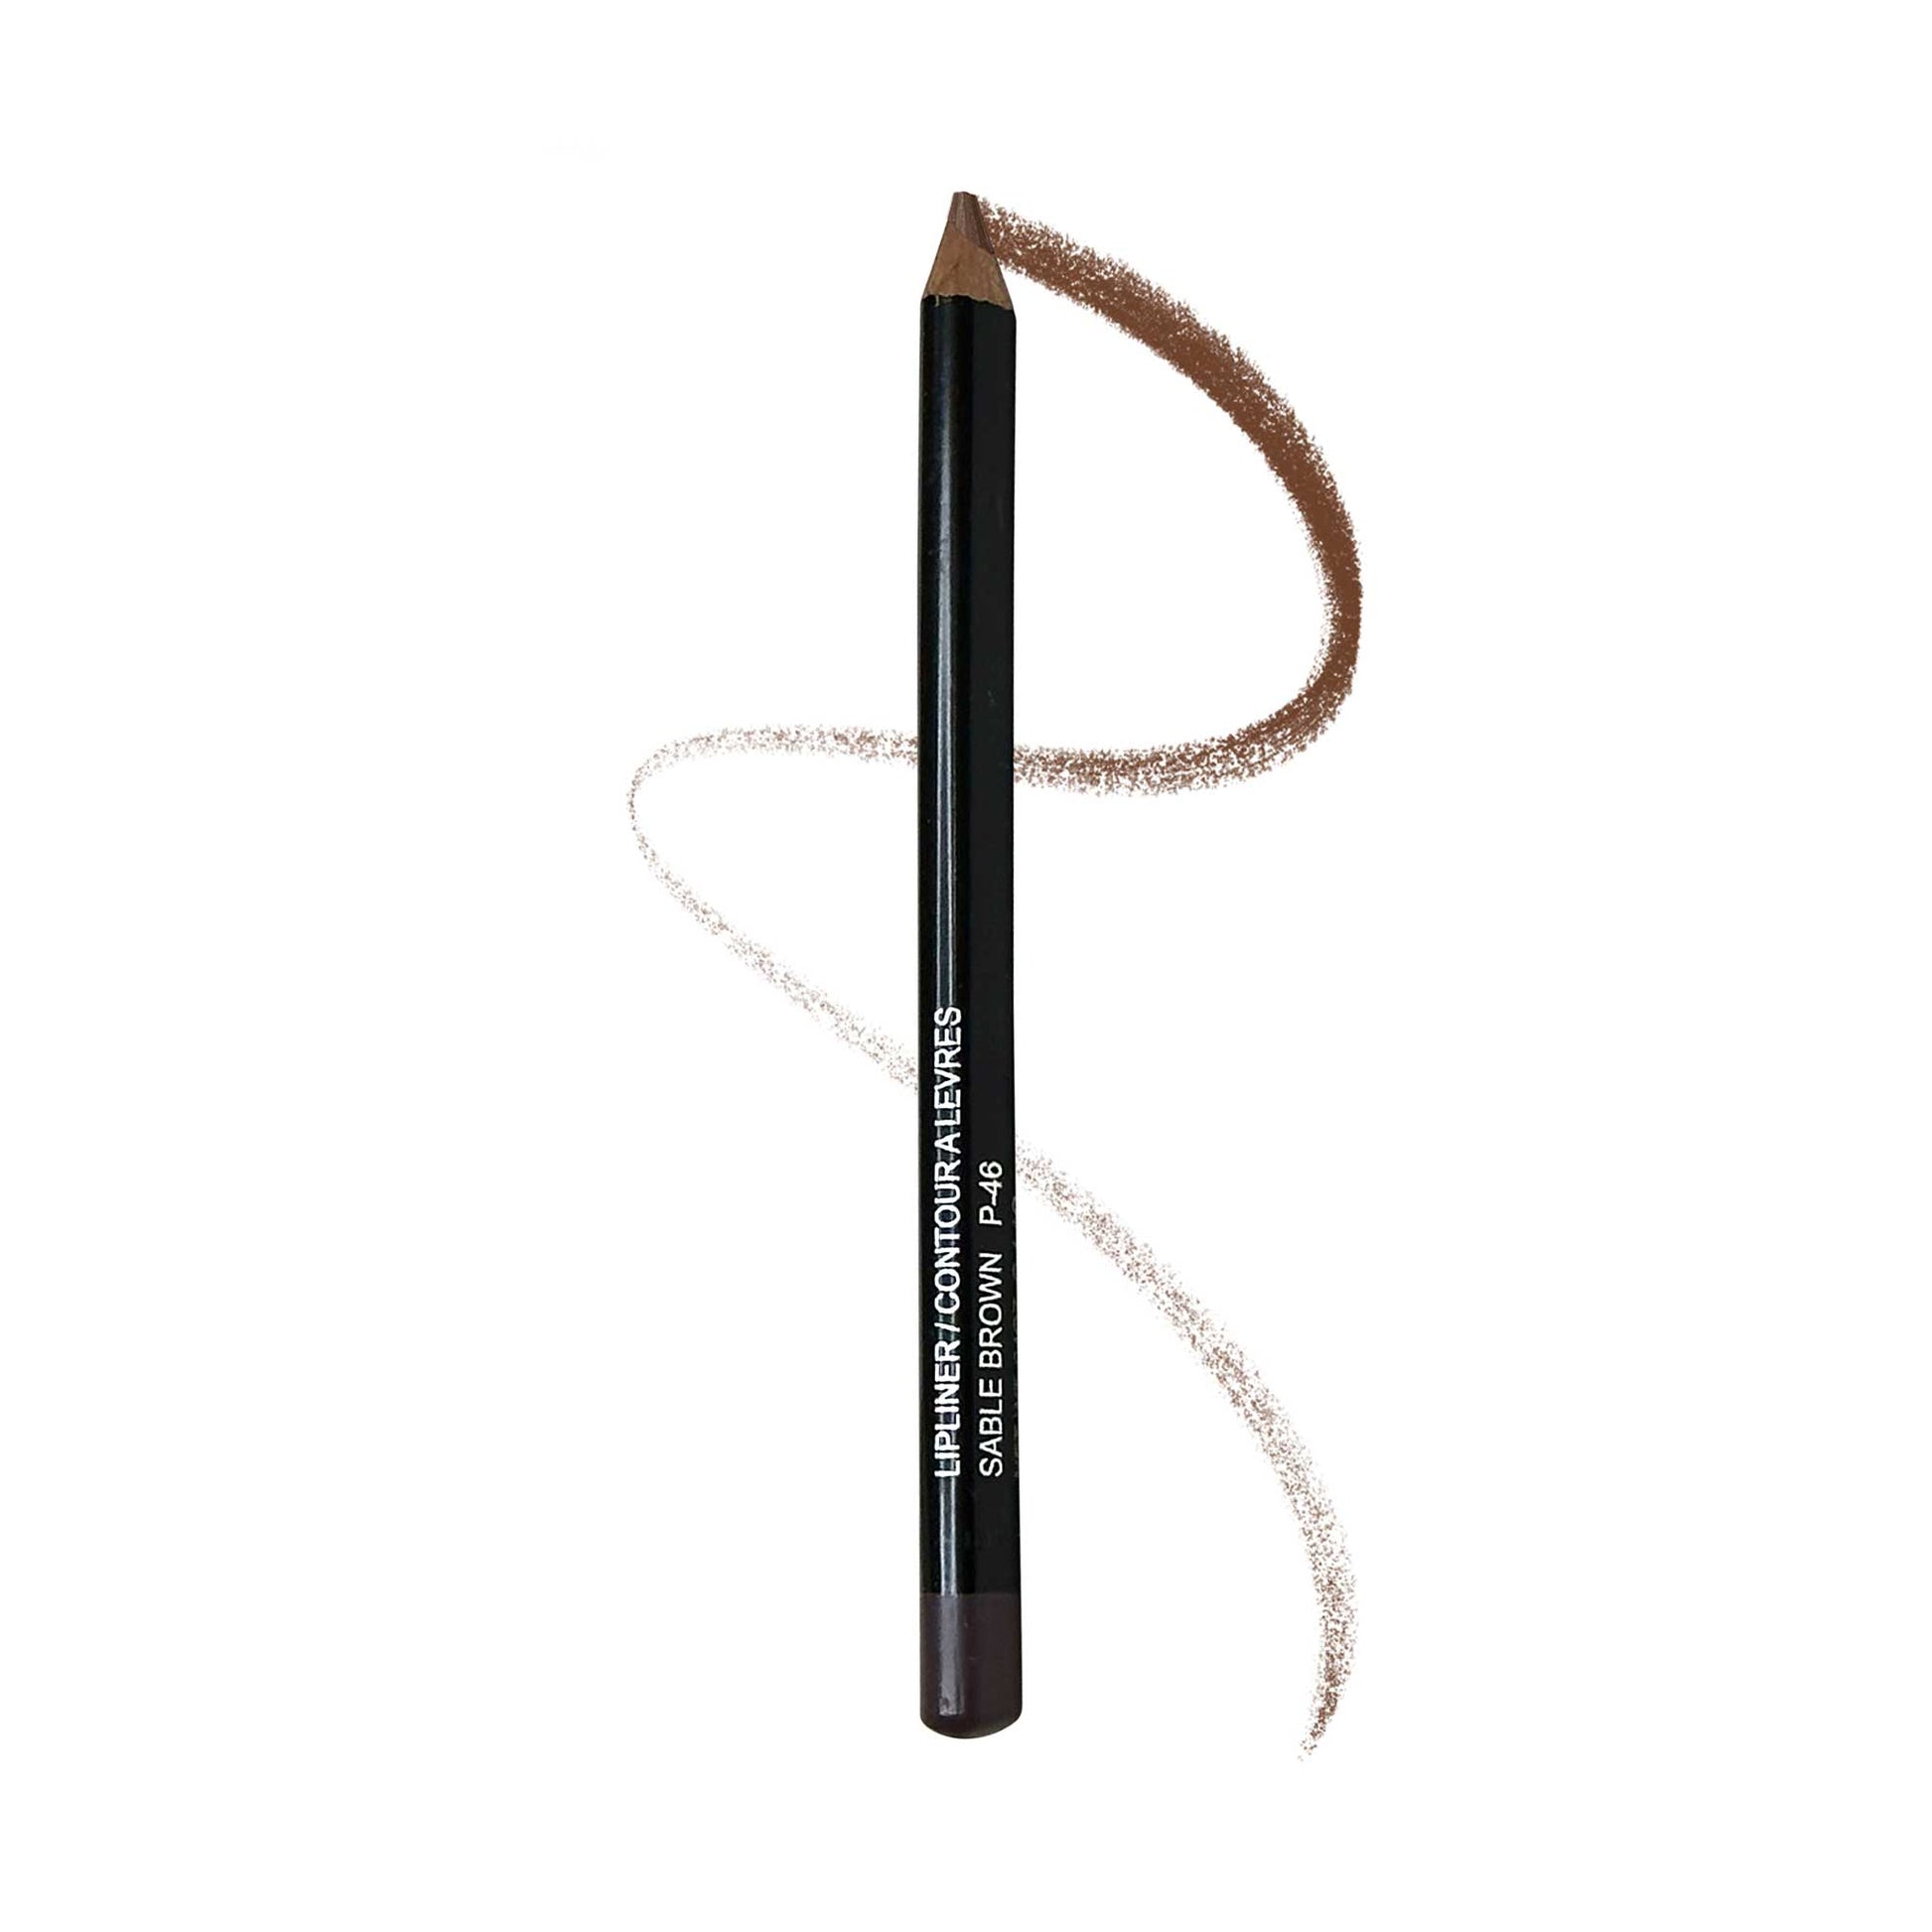 Cruisin Organics Apple Lip Liner. Crafted  by chemist with premium ingredients, this product offers exceptional color and precision for a lasting, impeccable look.